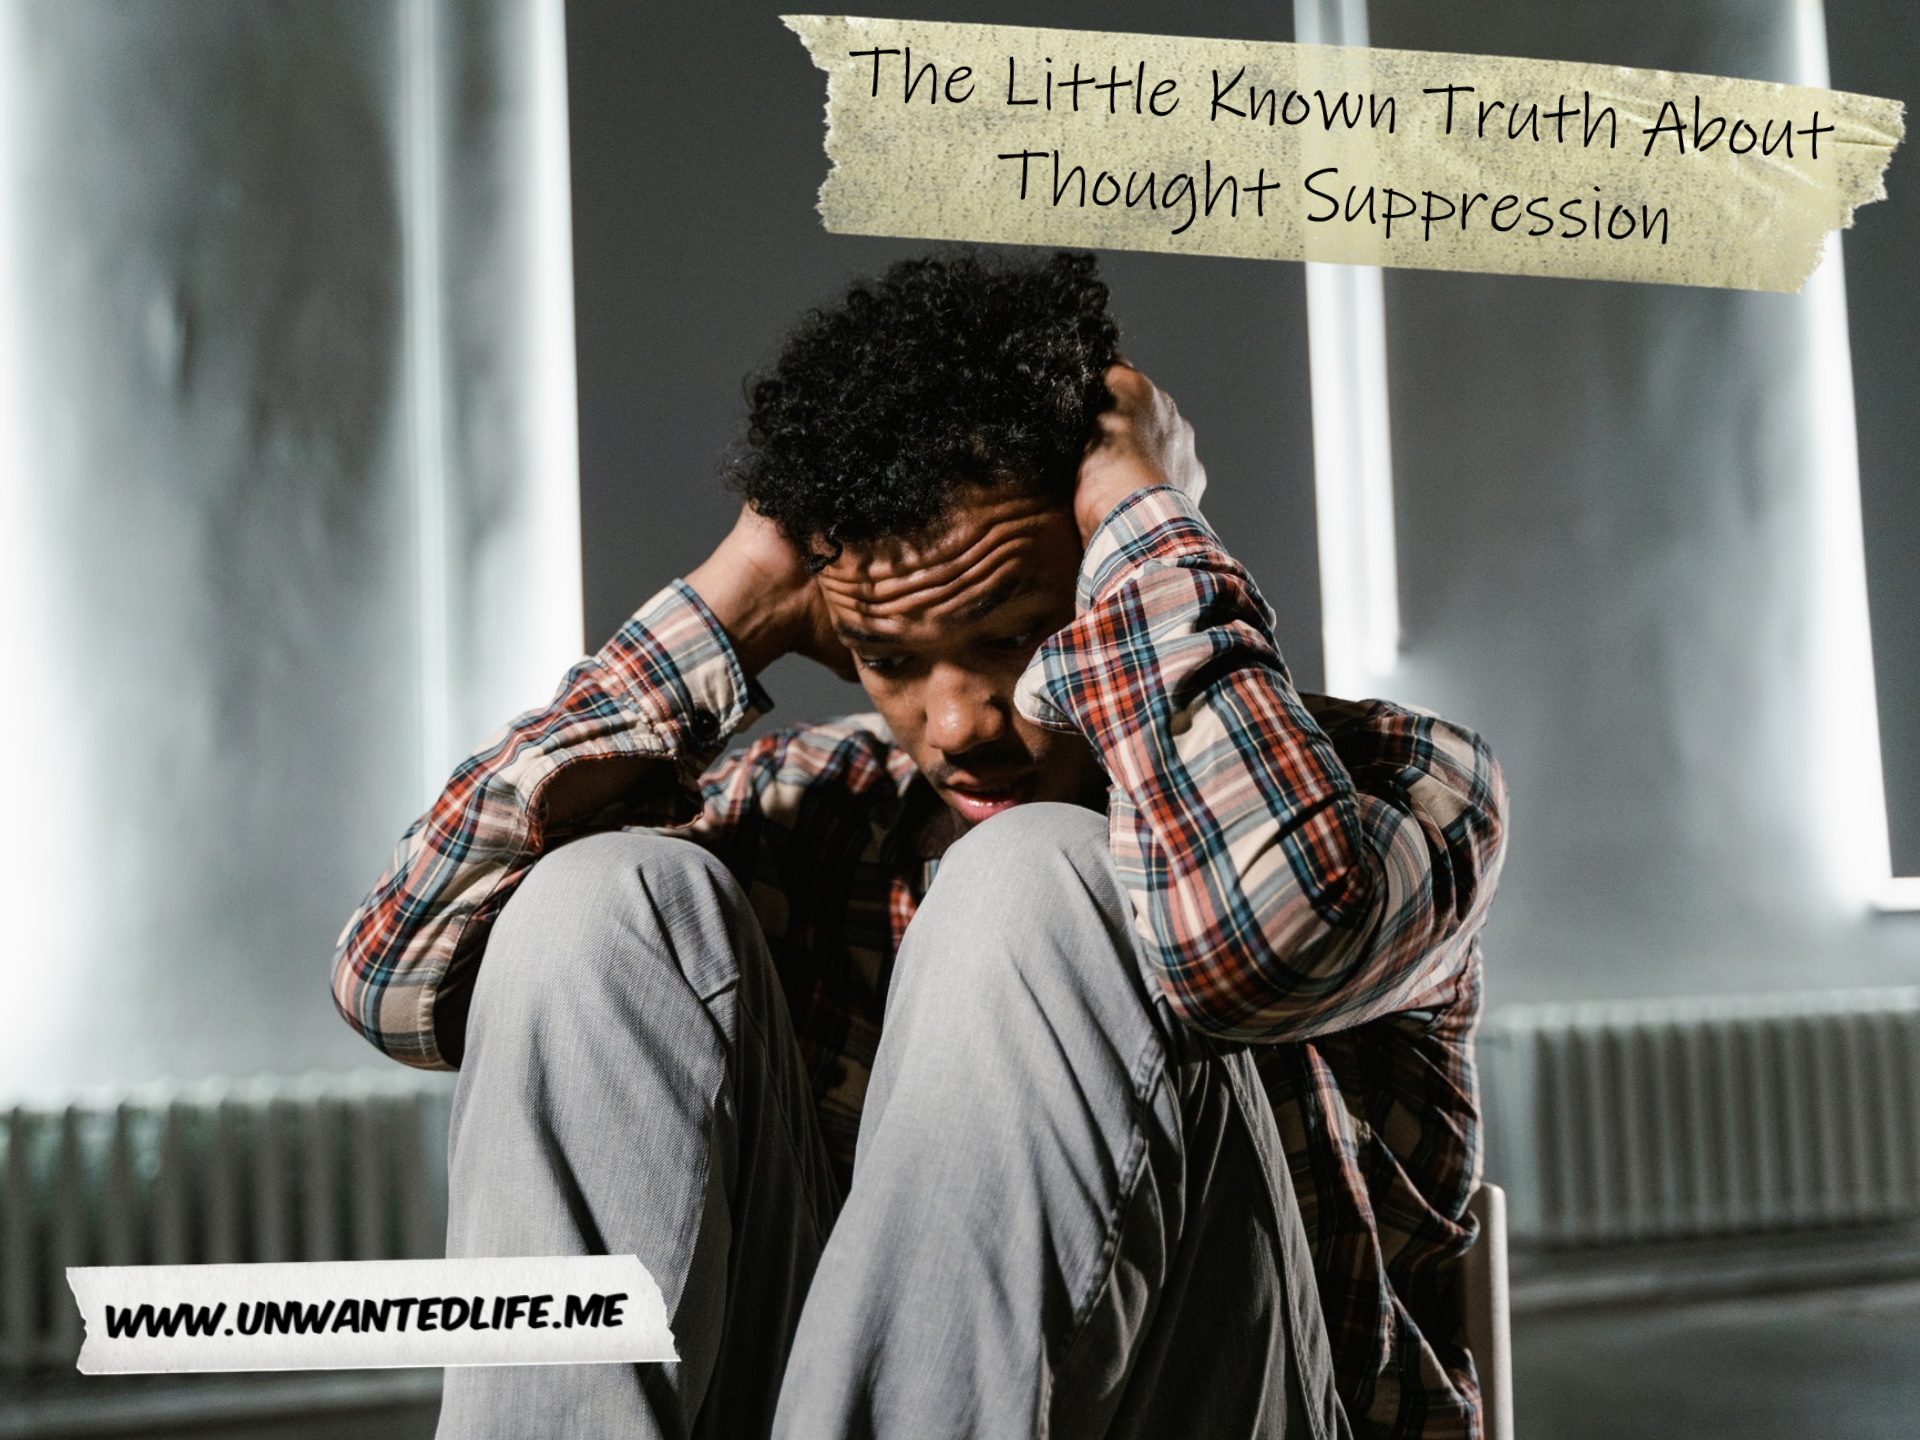 A photo of a Black man sitting on a chair in an empty room, with his knees to his chest and his hands over his ears, all while looking distressed. This is to represent the topic of the article - The Little Known Truth About Thought Suppression